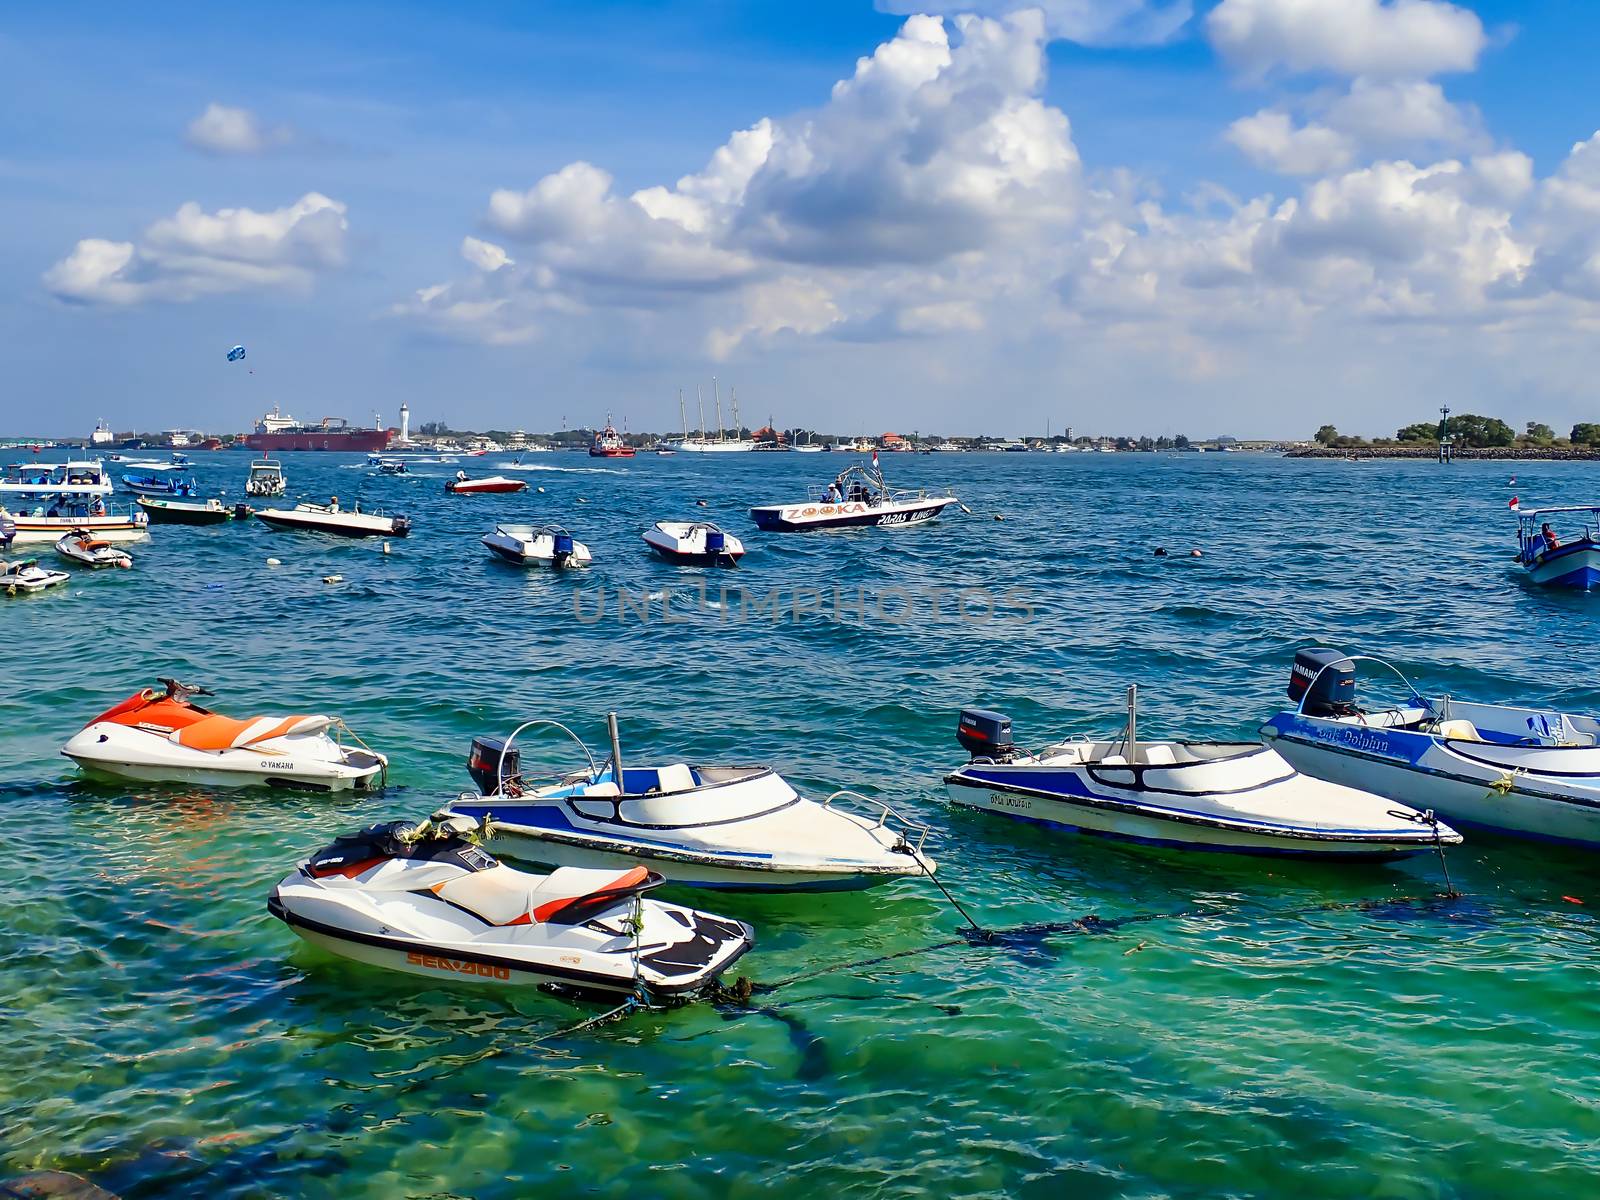 Bali Water sports vehicle and tourism package in Indonesia by silverwings